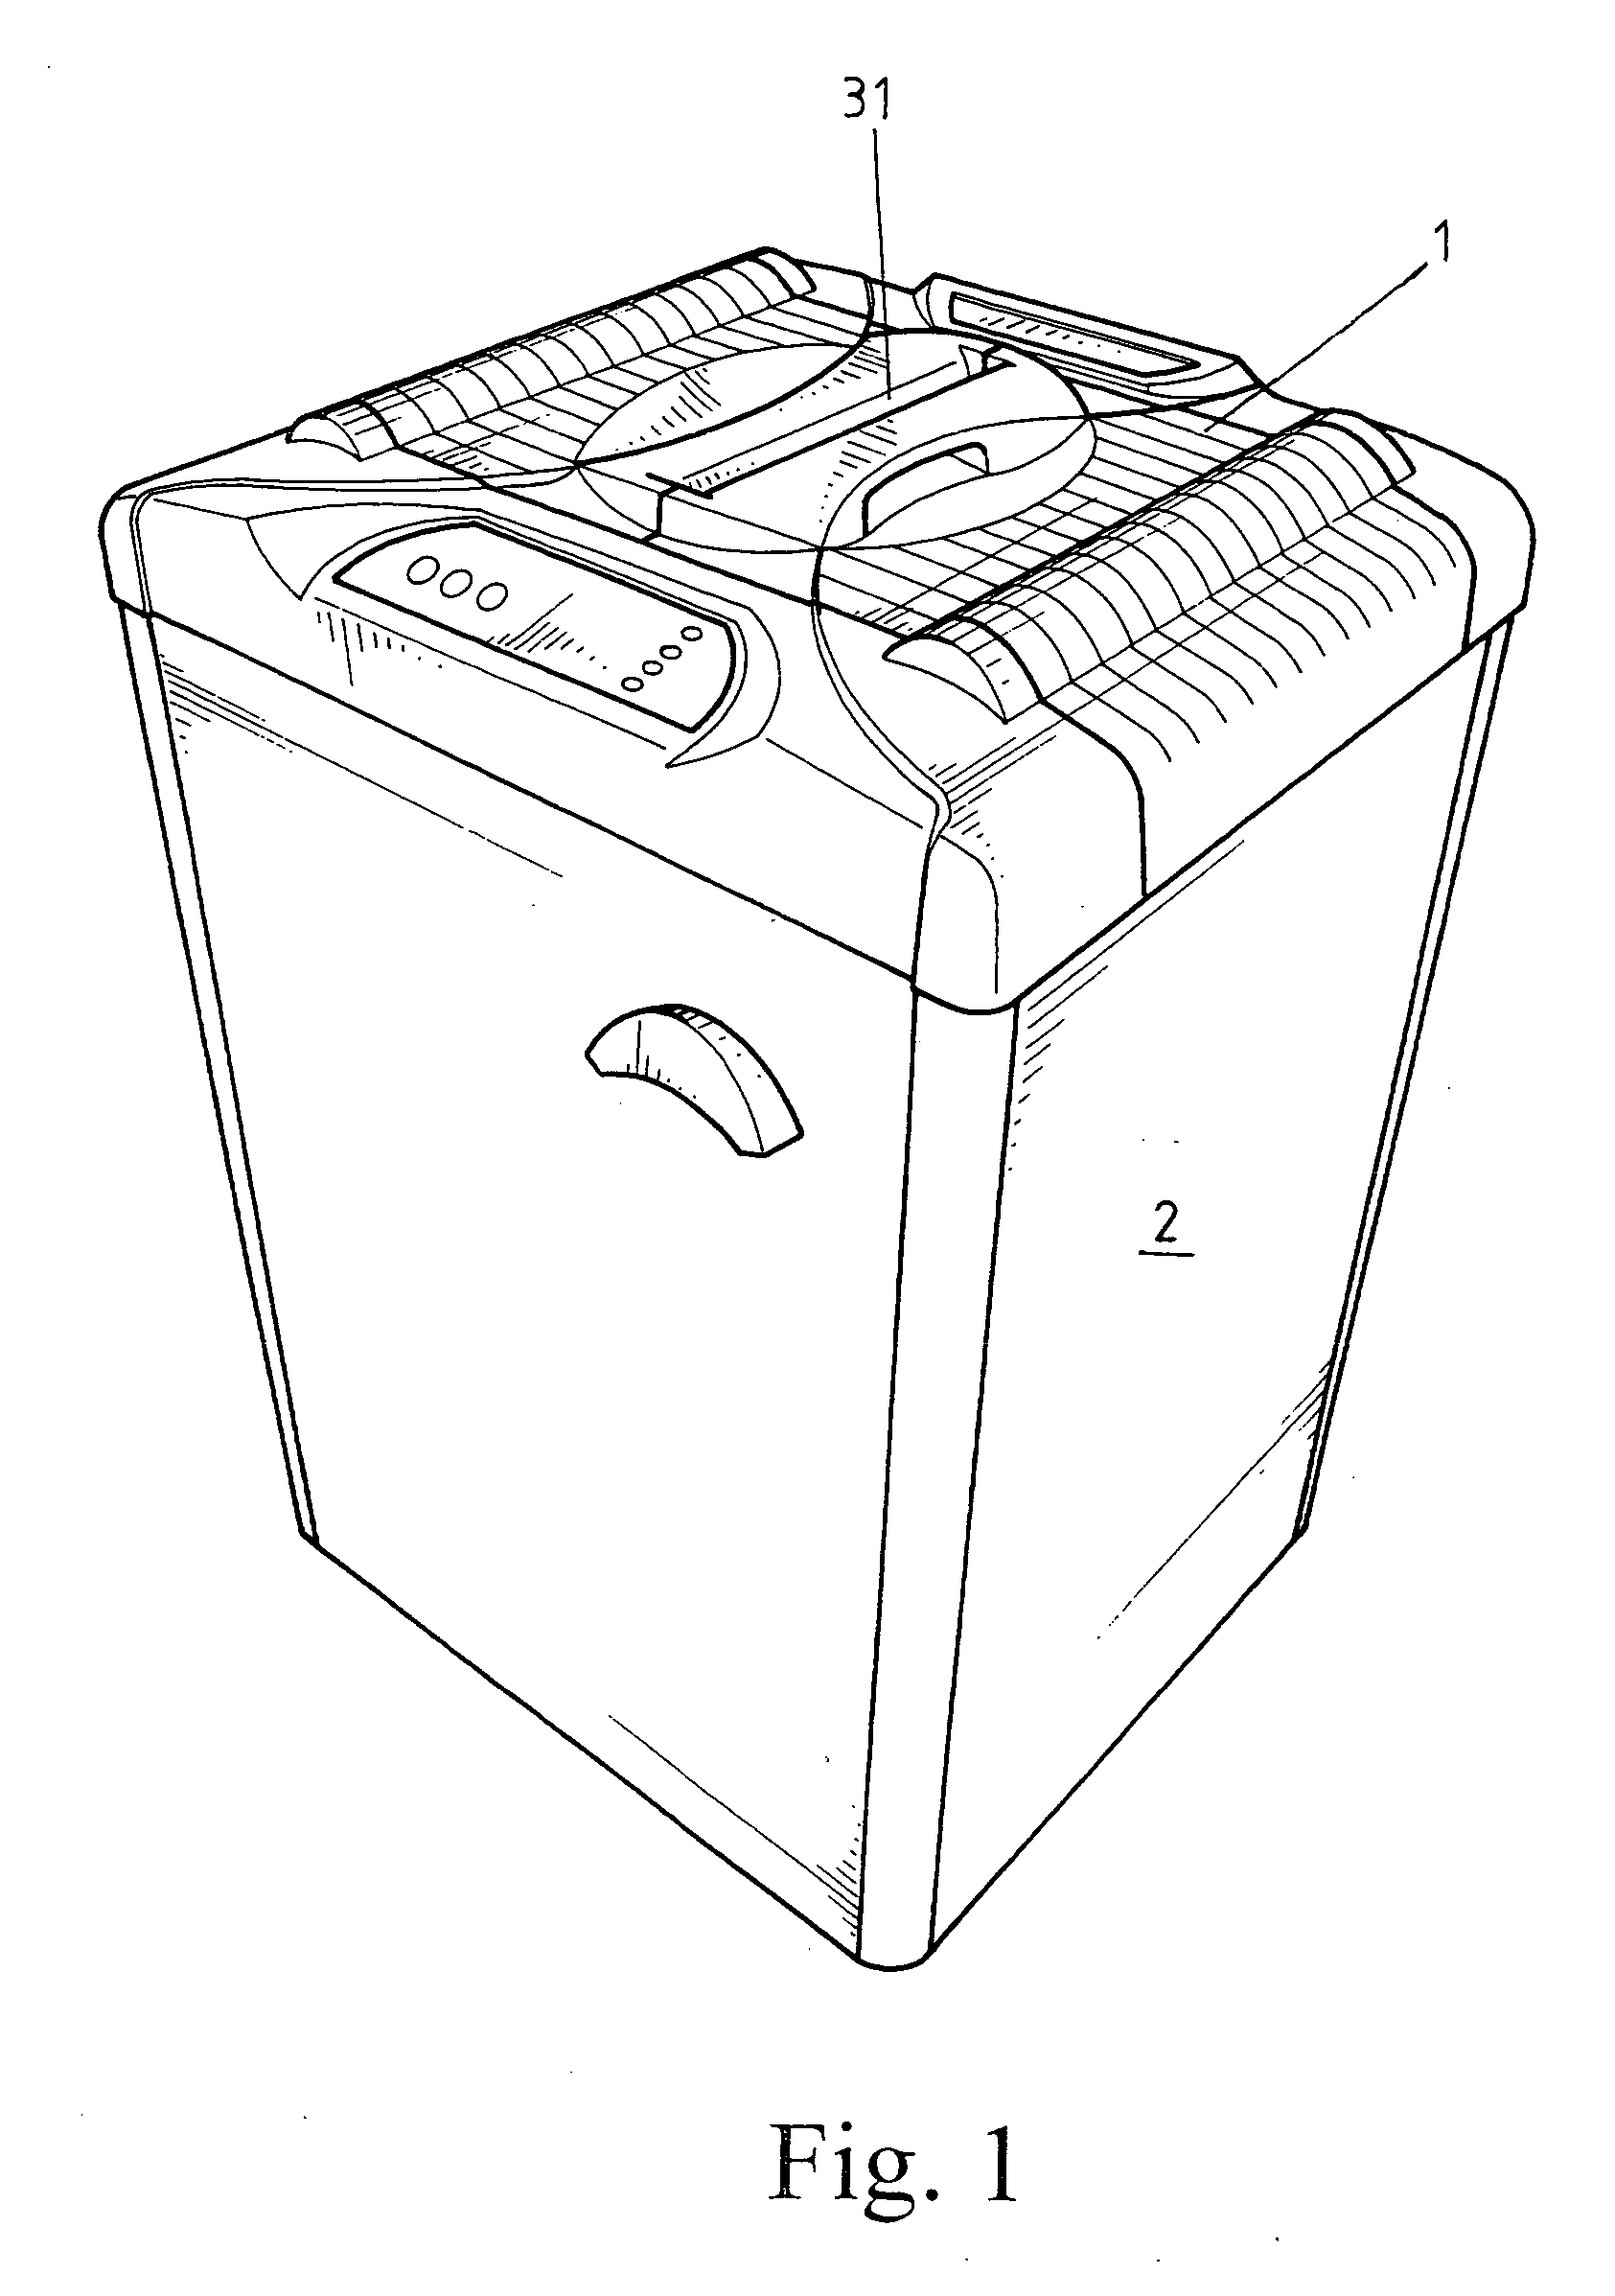 Auto-feed buit-in a paper shredder